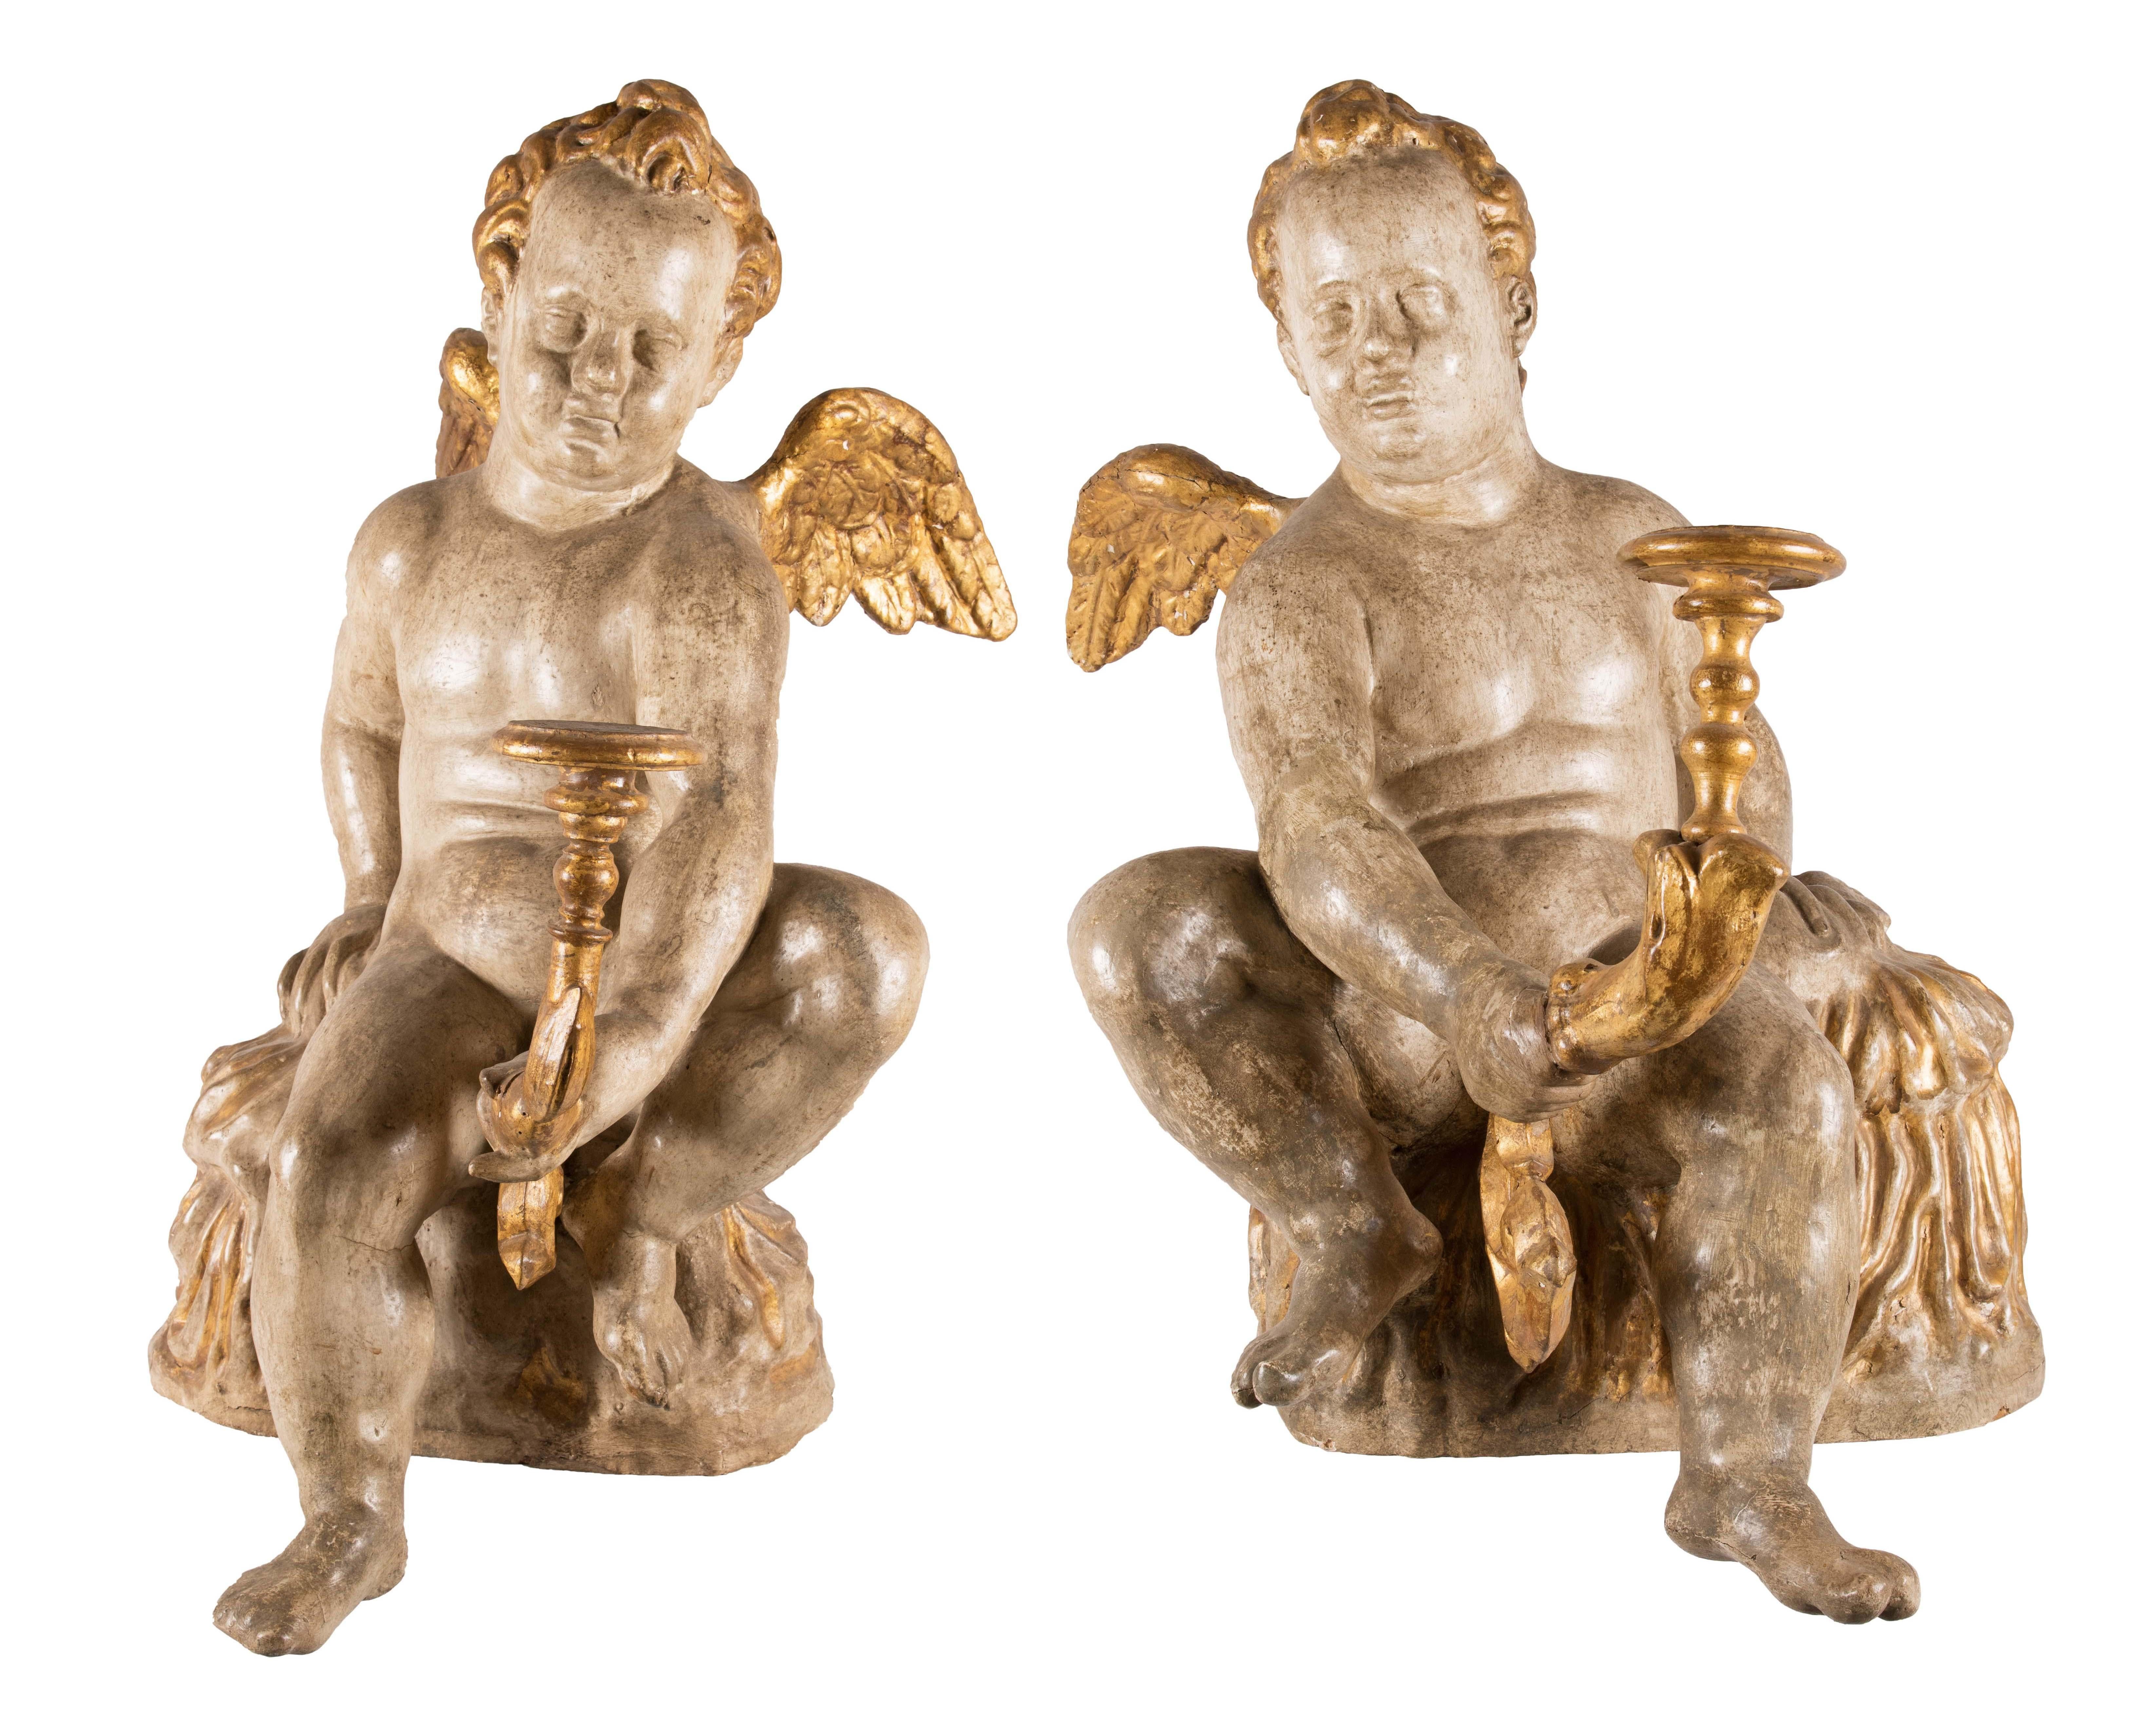 Pair of Italian Angels Sculptures, Italy 18th Century, Papier-mâché Lacquered